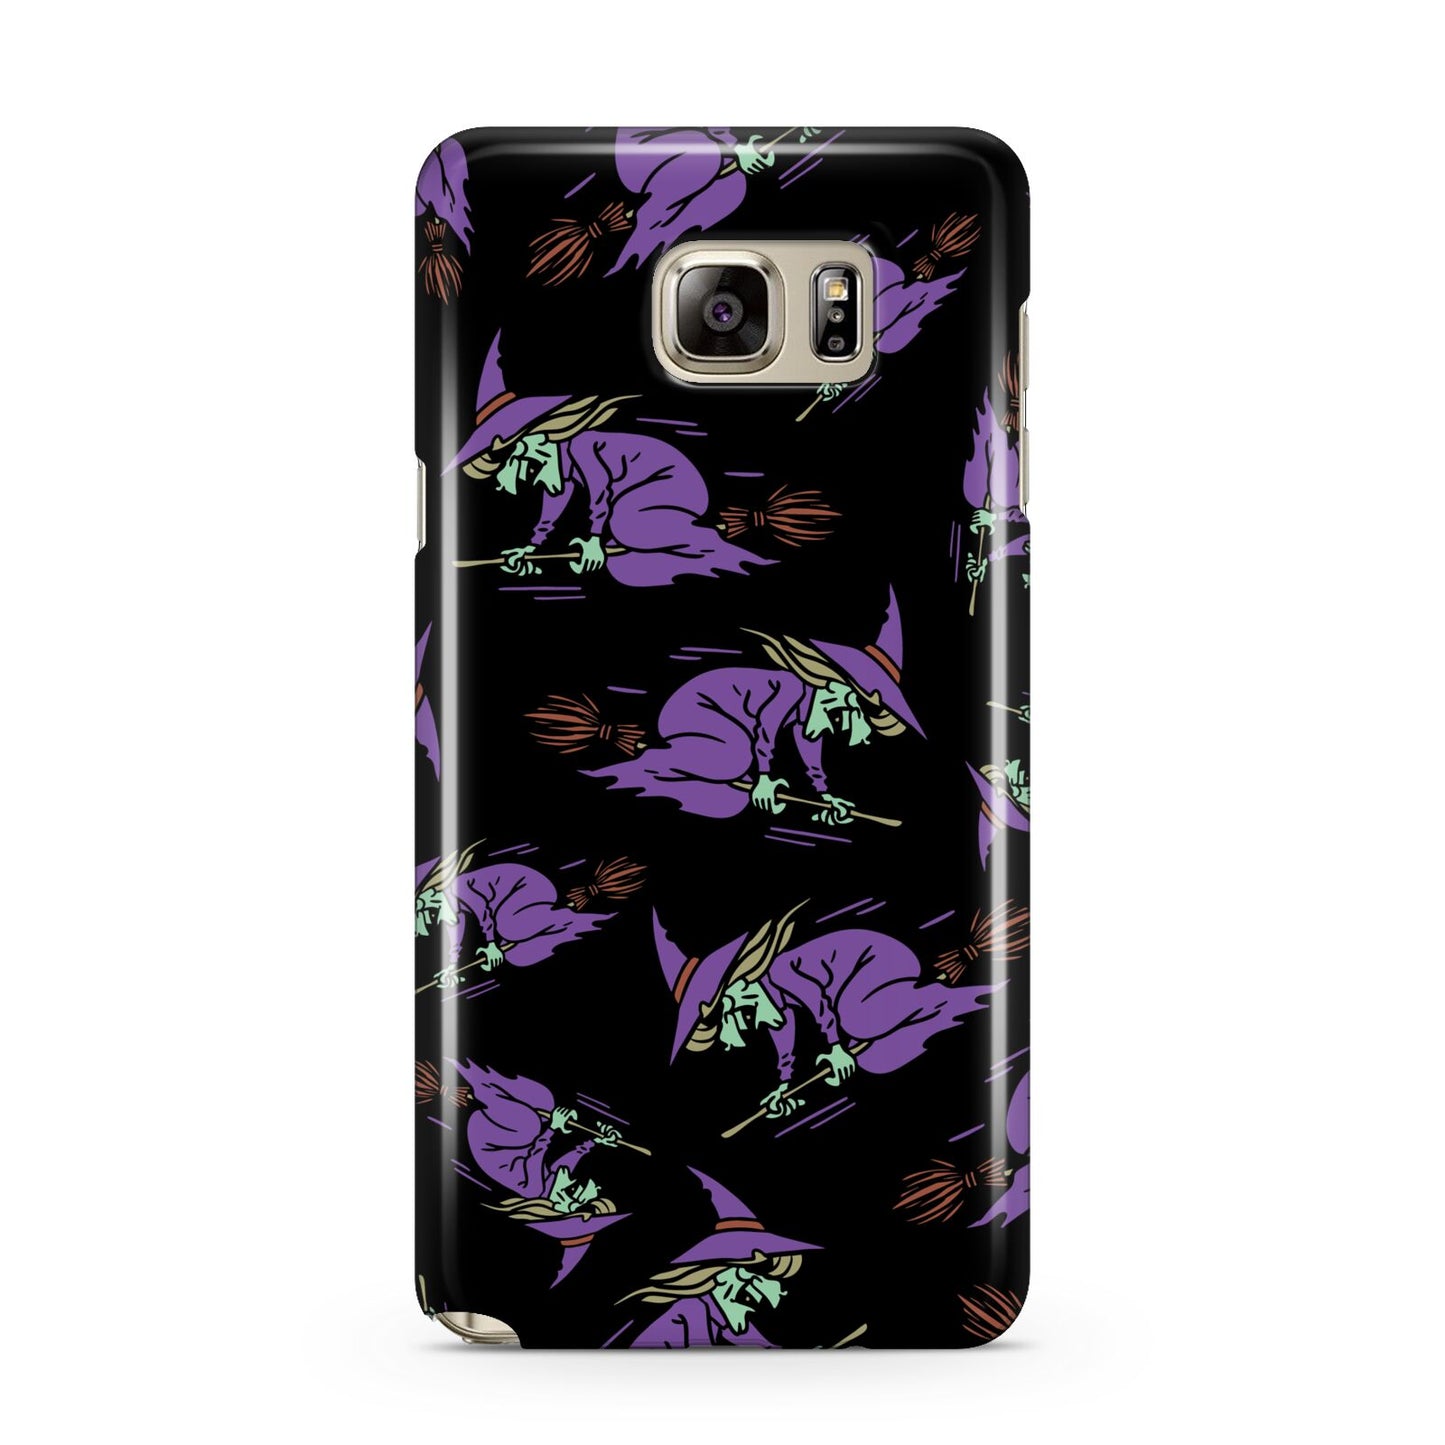 Flying Witches Samsung Galaxy Note 5 Case